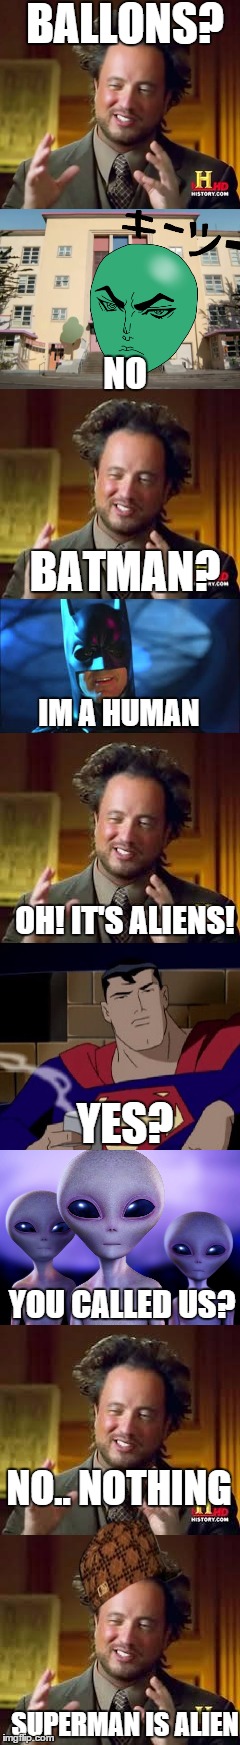 What was the word..? | BALLONS? NO; BATMAN? IM A HUMAN; OH! IT'S ALIENS! YES? YOU CALLED US? NO.. NOTHING; SUPERMAN IS ALIEN | image tagged in ancient aliens guy,funny memes,memes,funny,superman,aliens | made w/ Imgflip meme maker